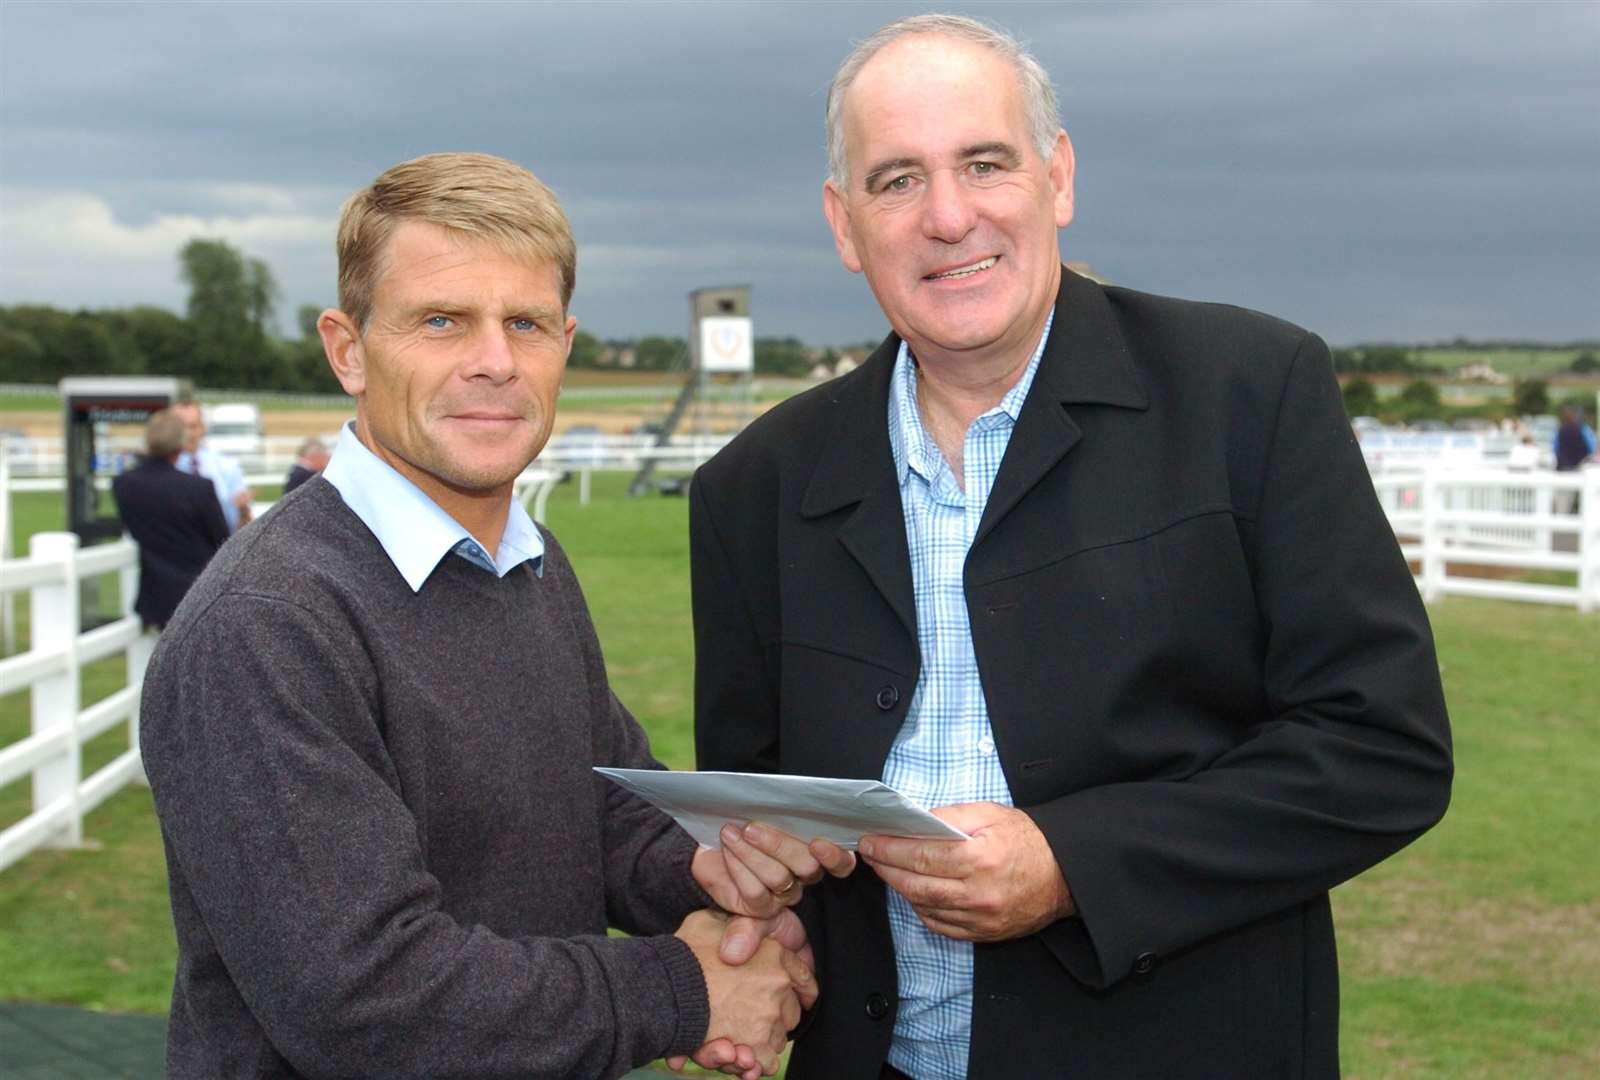 Alan celebrated his 60th birthday at Folkestone race course with club legend Andy Hessenthaler Picture: Danny Rhodes